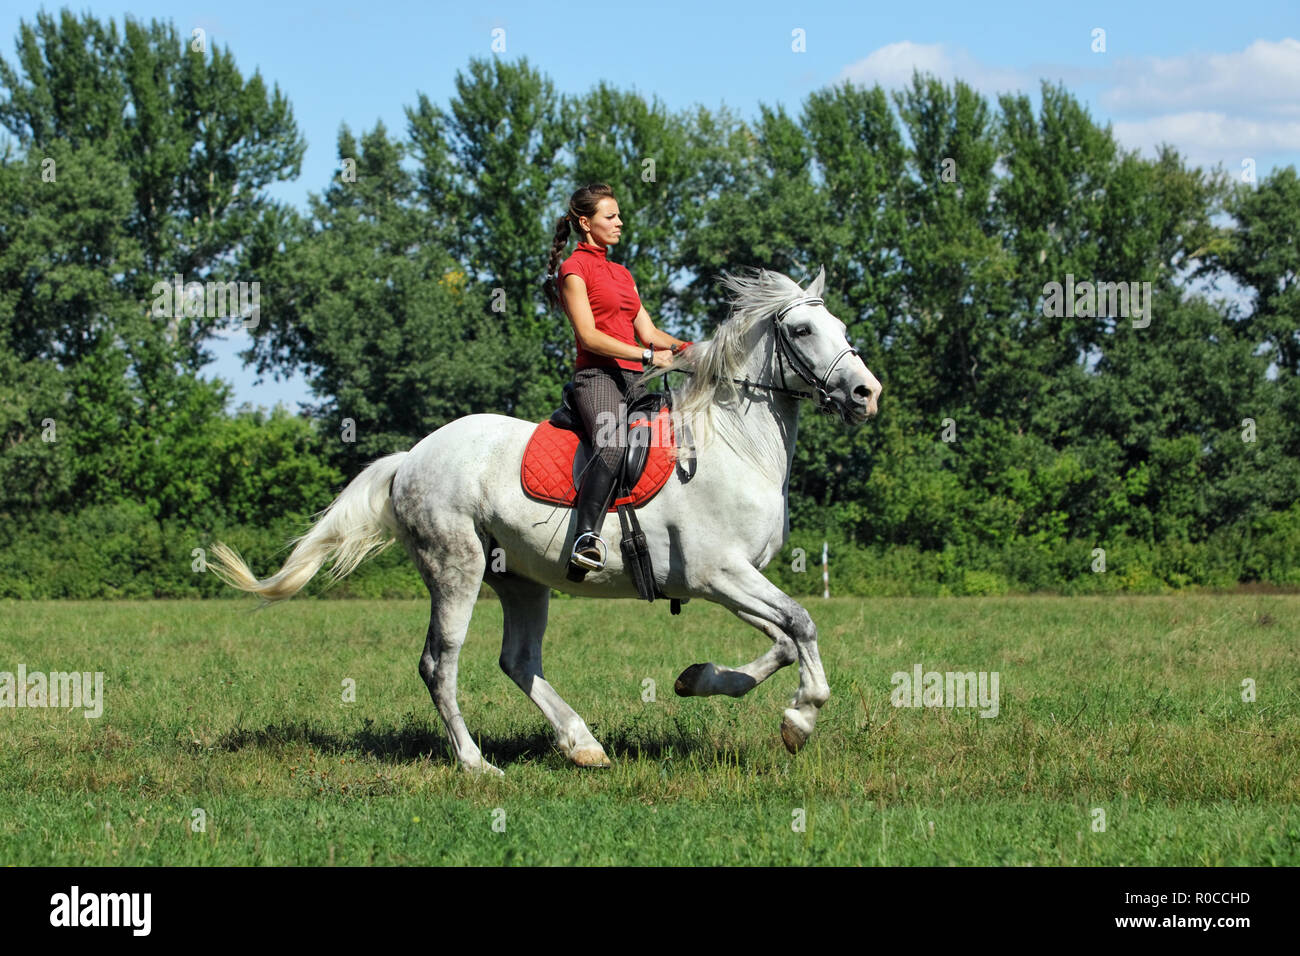 Equestrian training sportswoman with horse Stock Photo